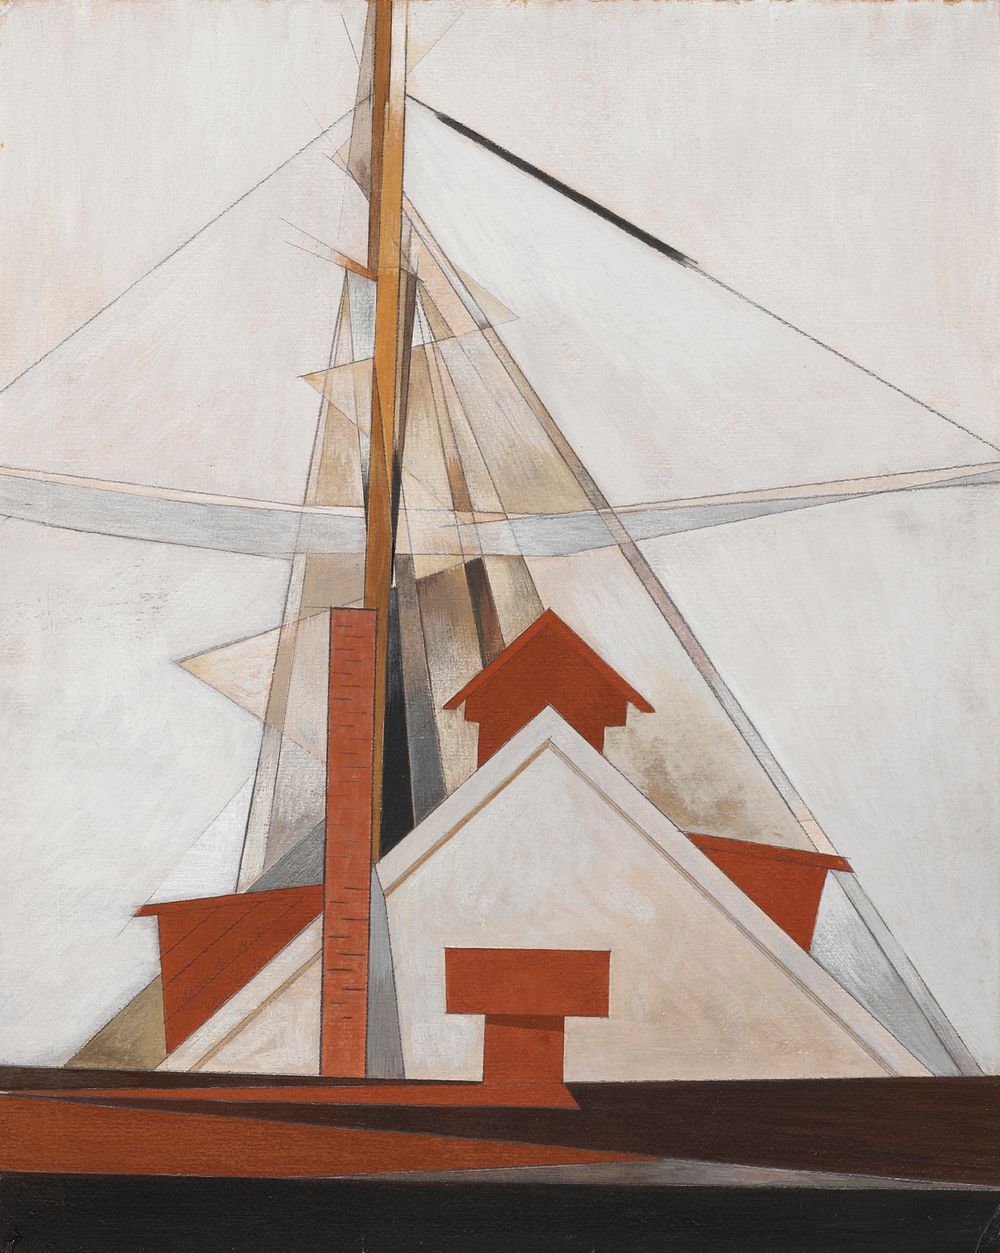 Masts by Charles Demuth